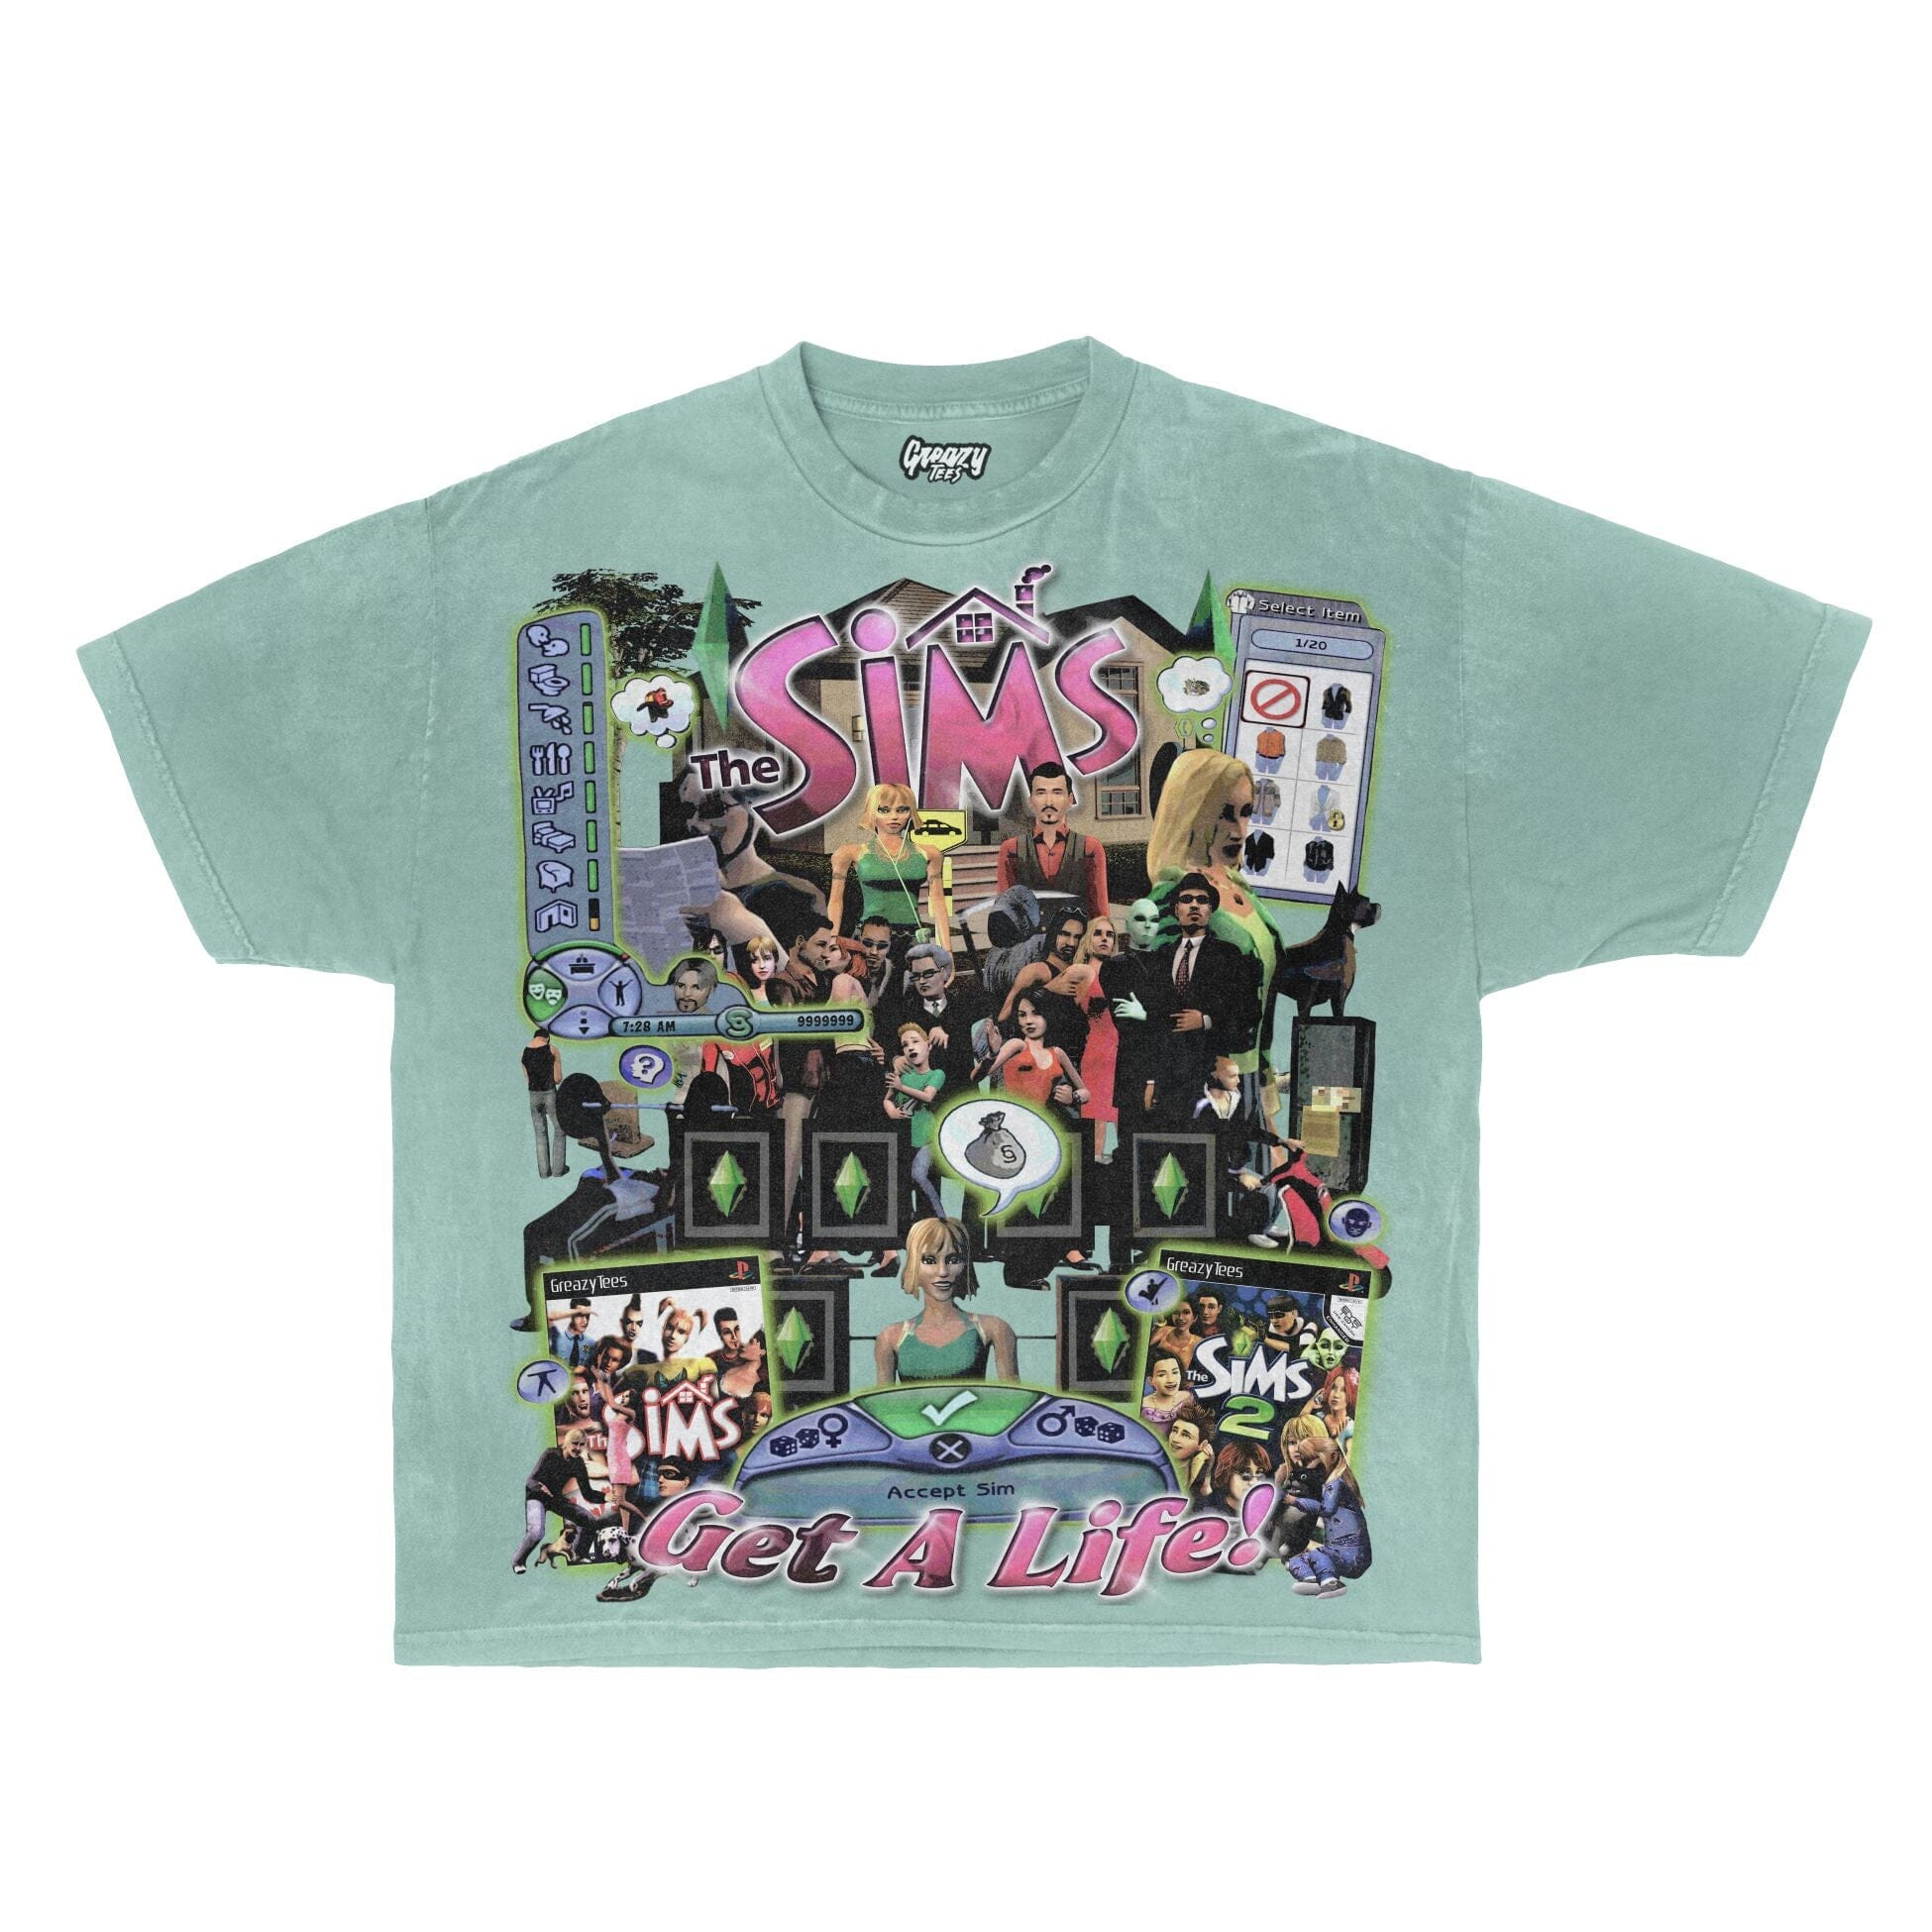 The Sims Tee Tee Greazy Tees XS Mint Green Oversized